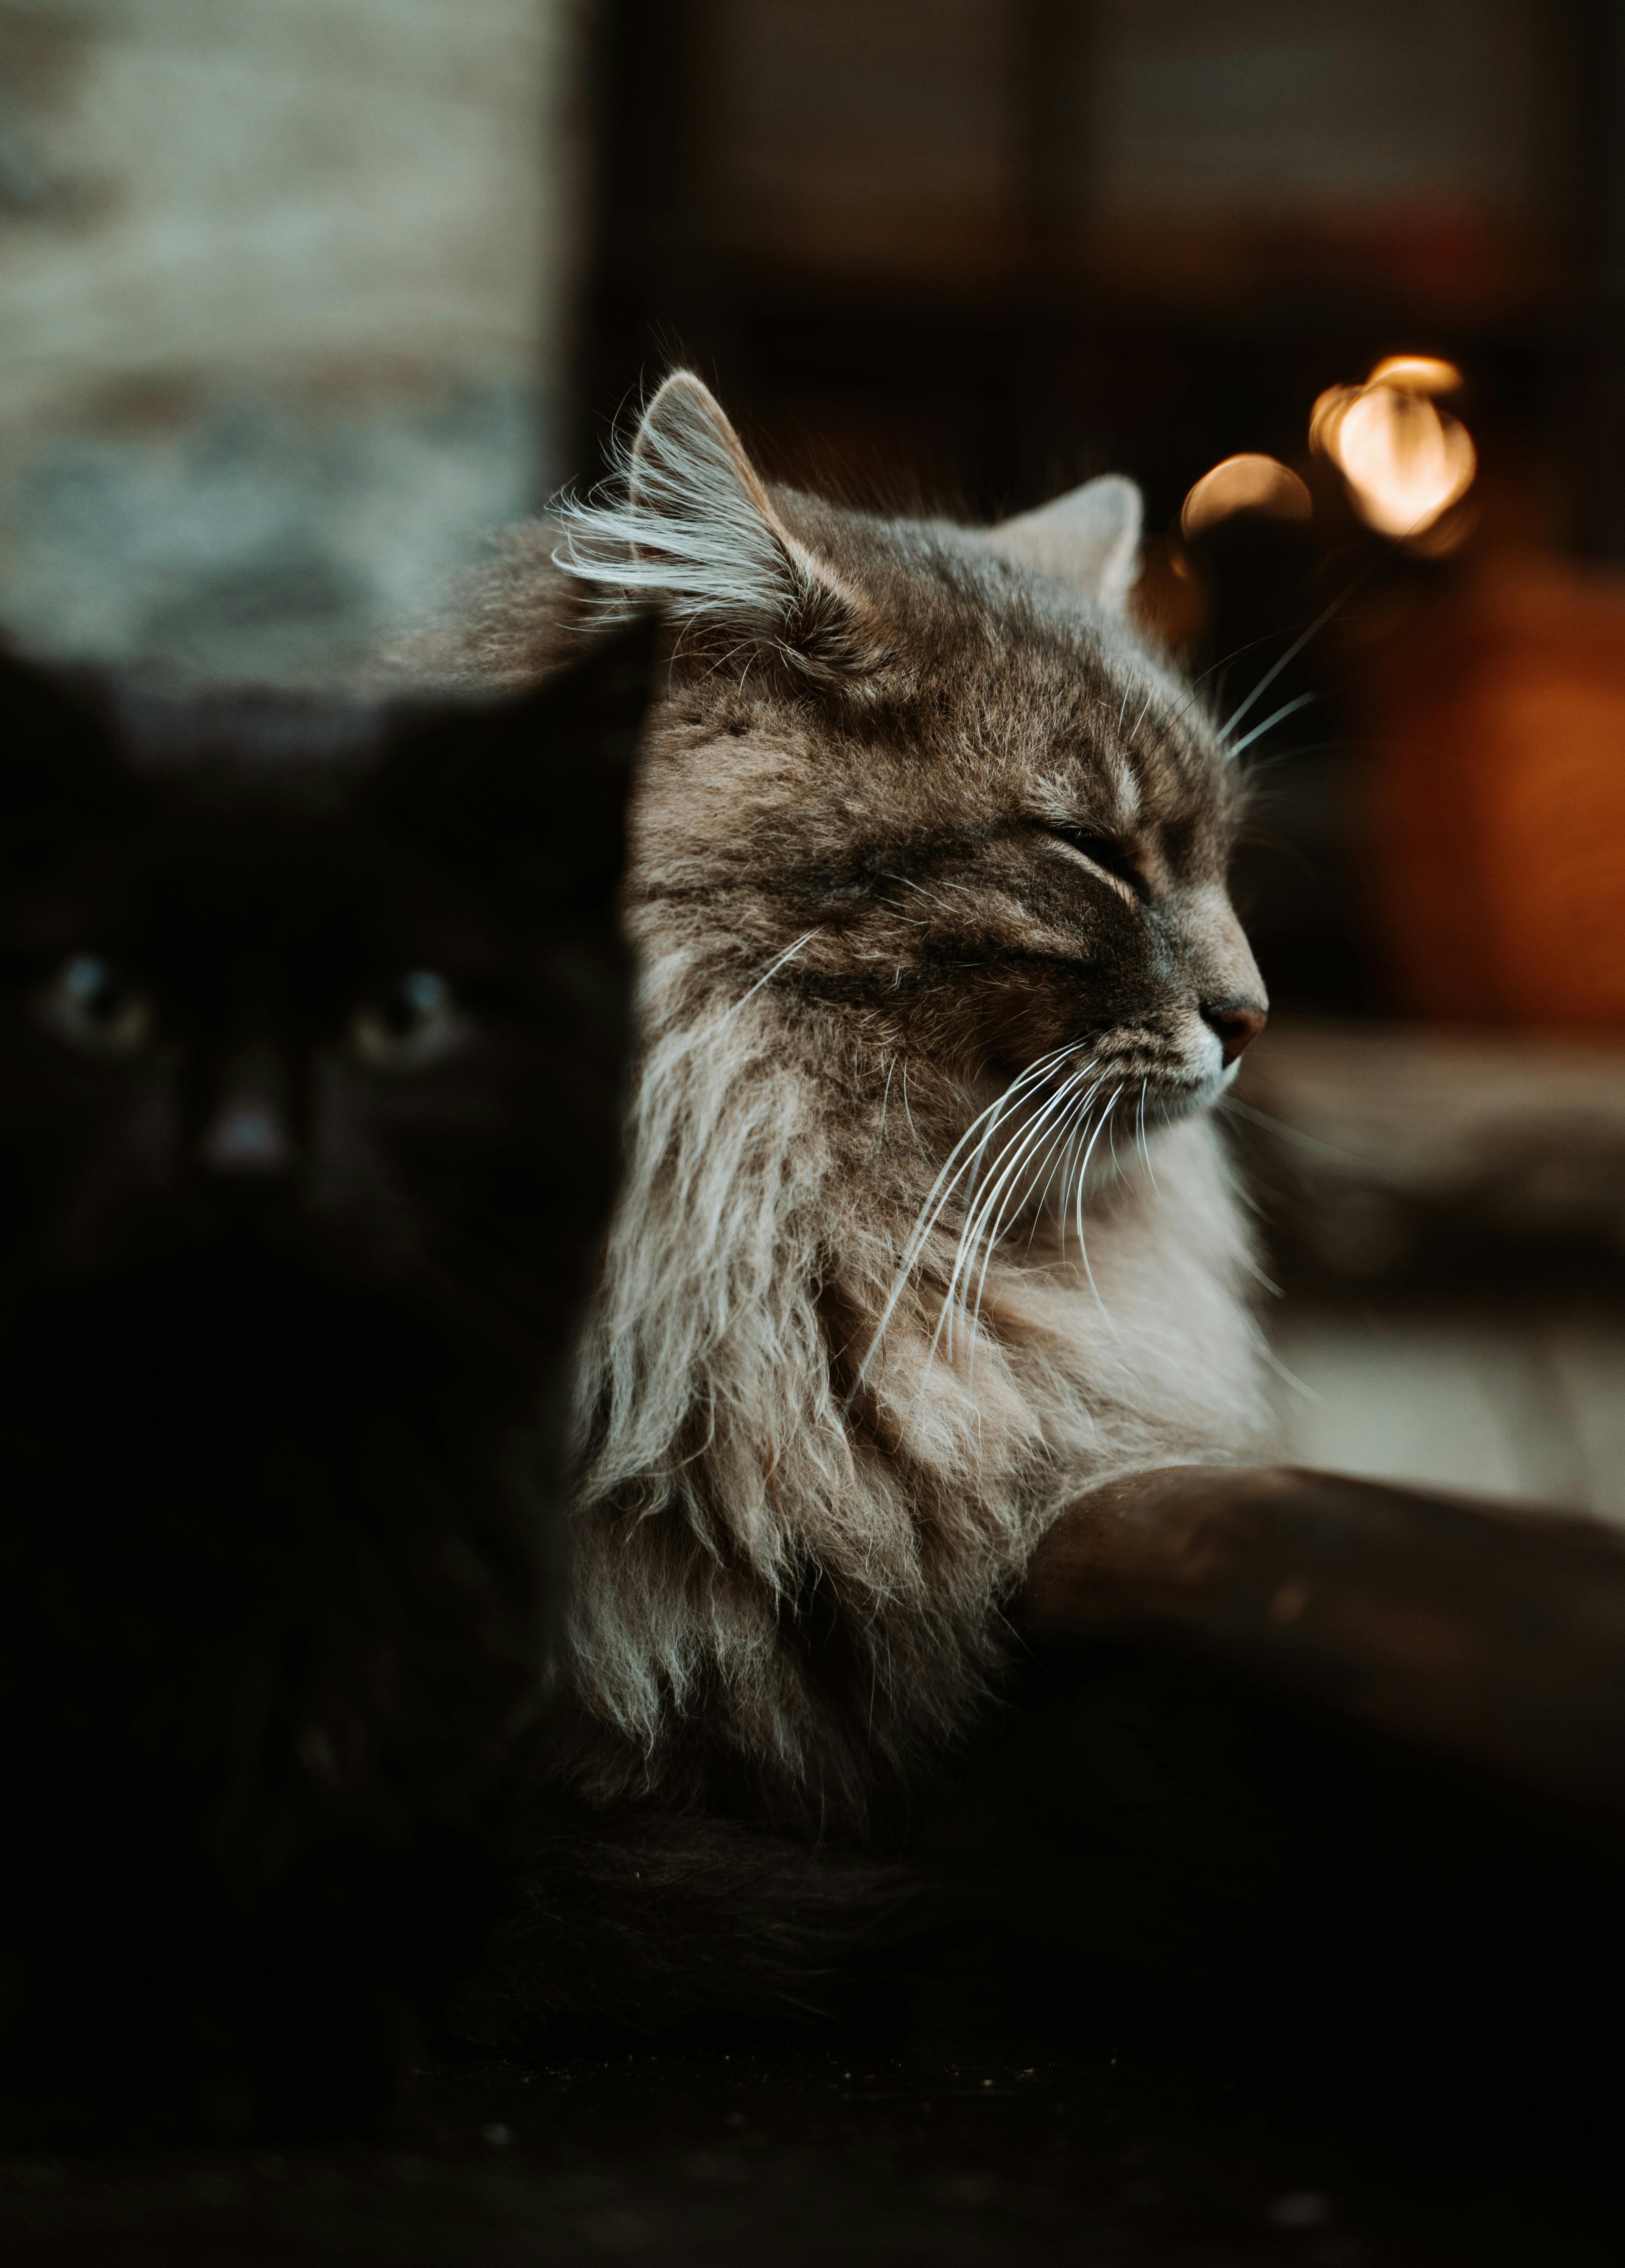 Cats in Close Up Photography · Free Stock Photo